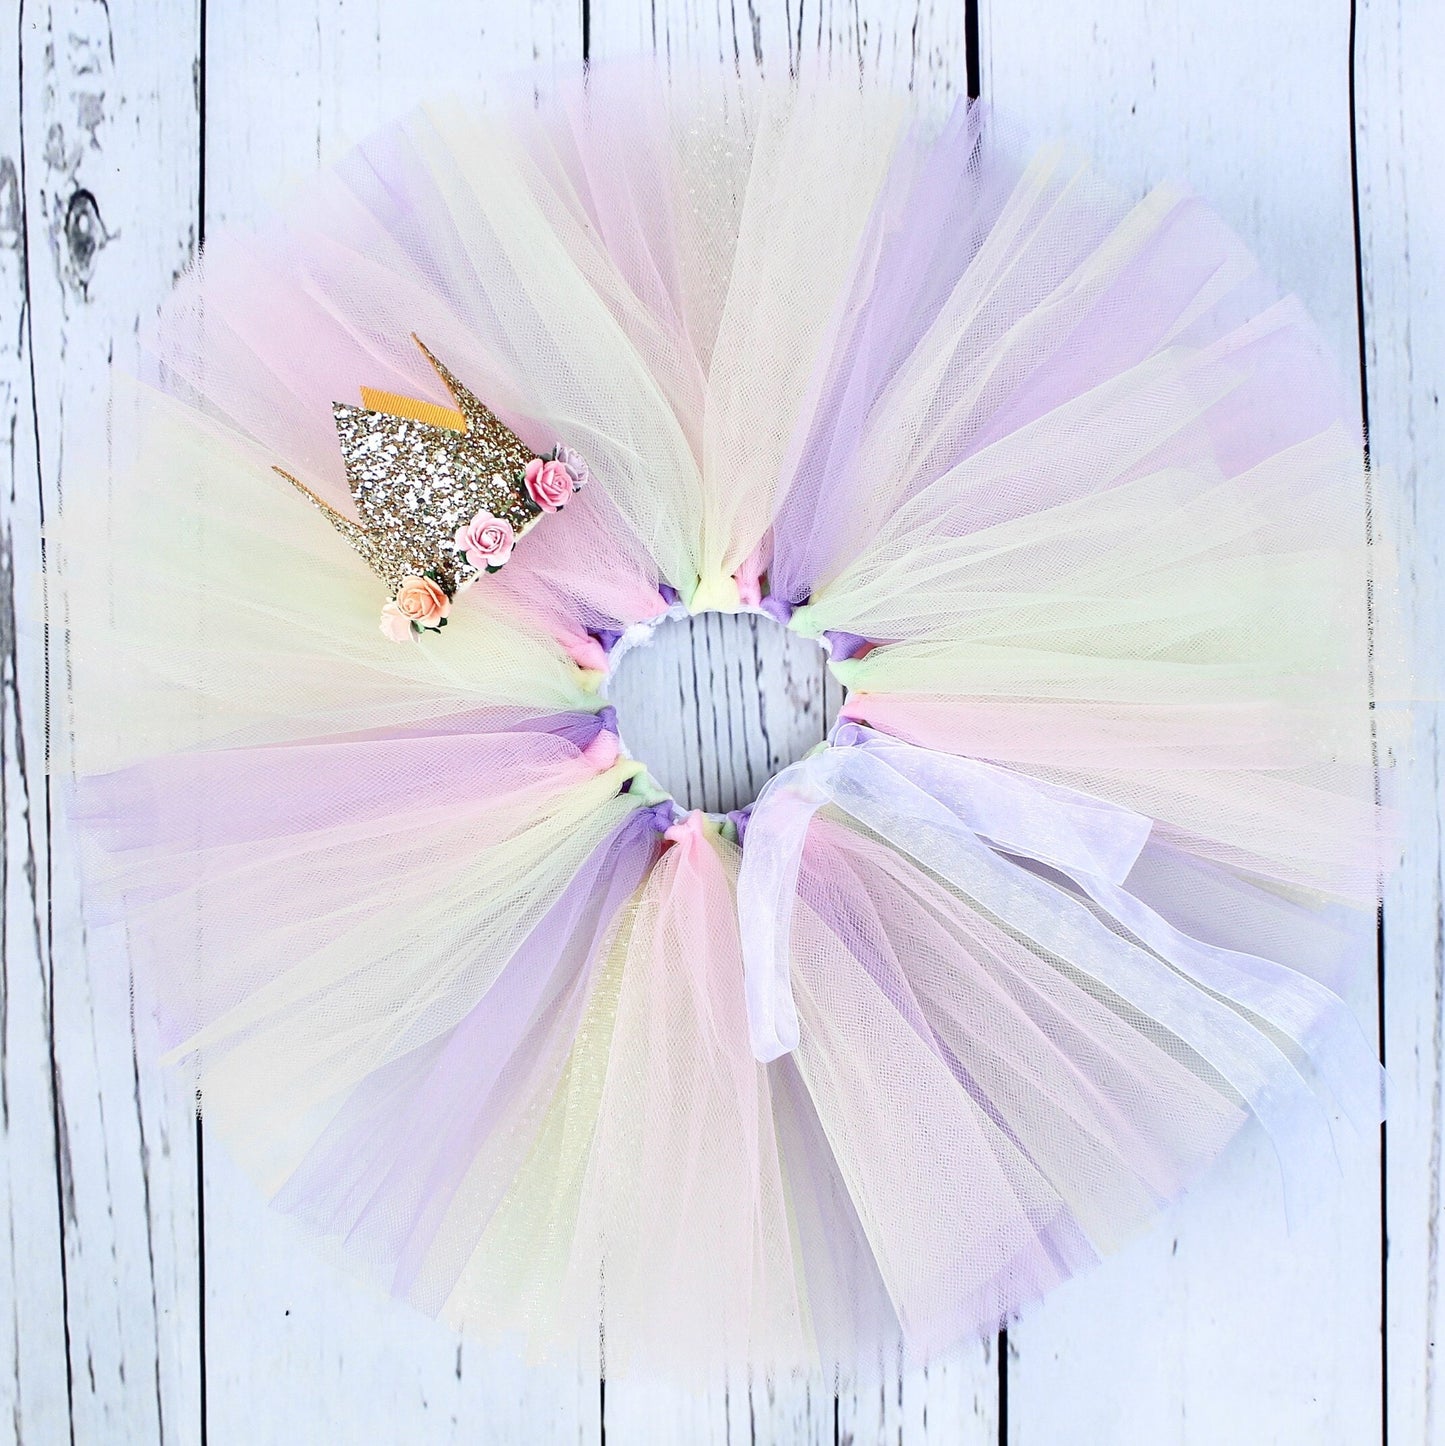 Pastel Rainbow Tutu Skirt with Sparkly Gold Crown